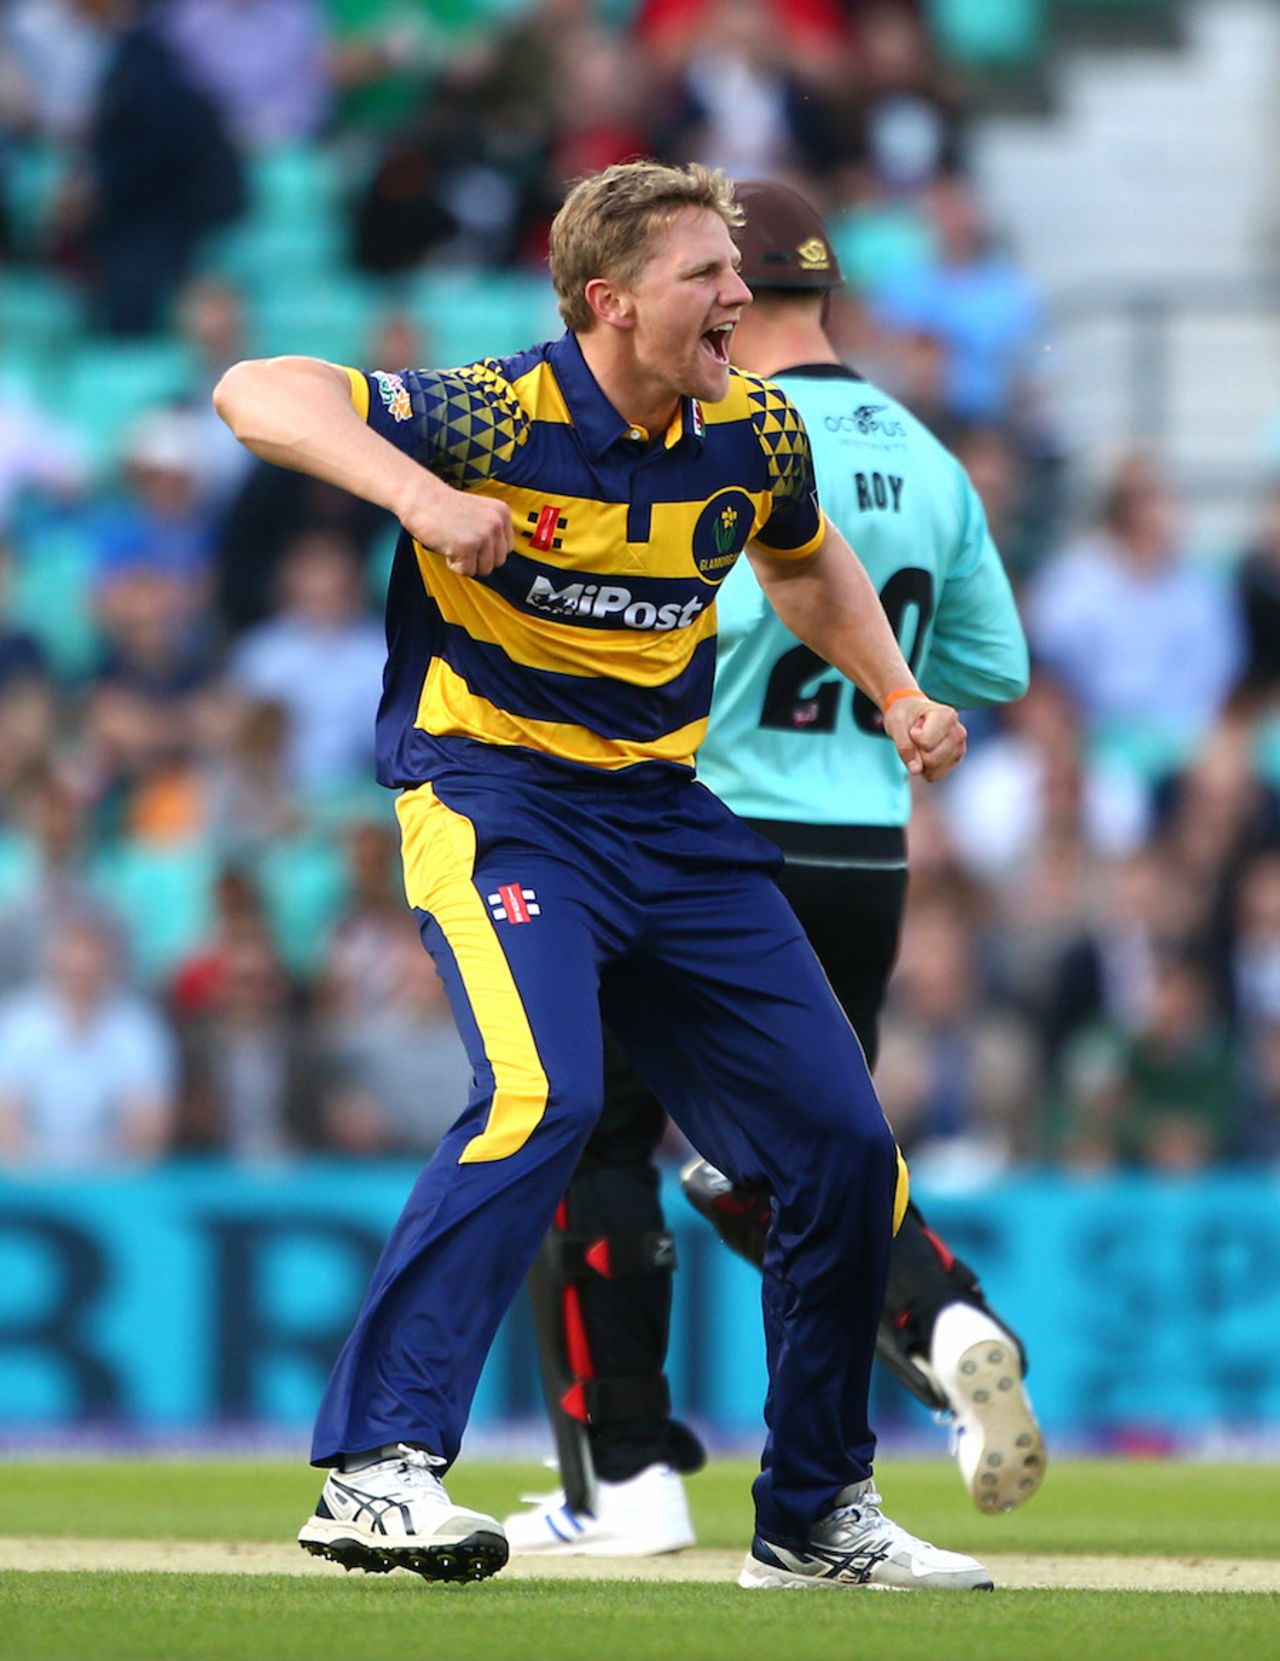 Timm van der Gugten finished with 4 for 14, Surrey v Glamorgan, NatWest T20 Blast, South Group, Kia Oval, May 26, 2016